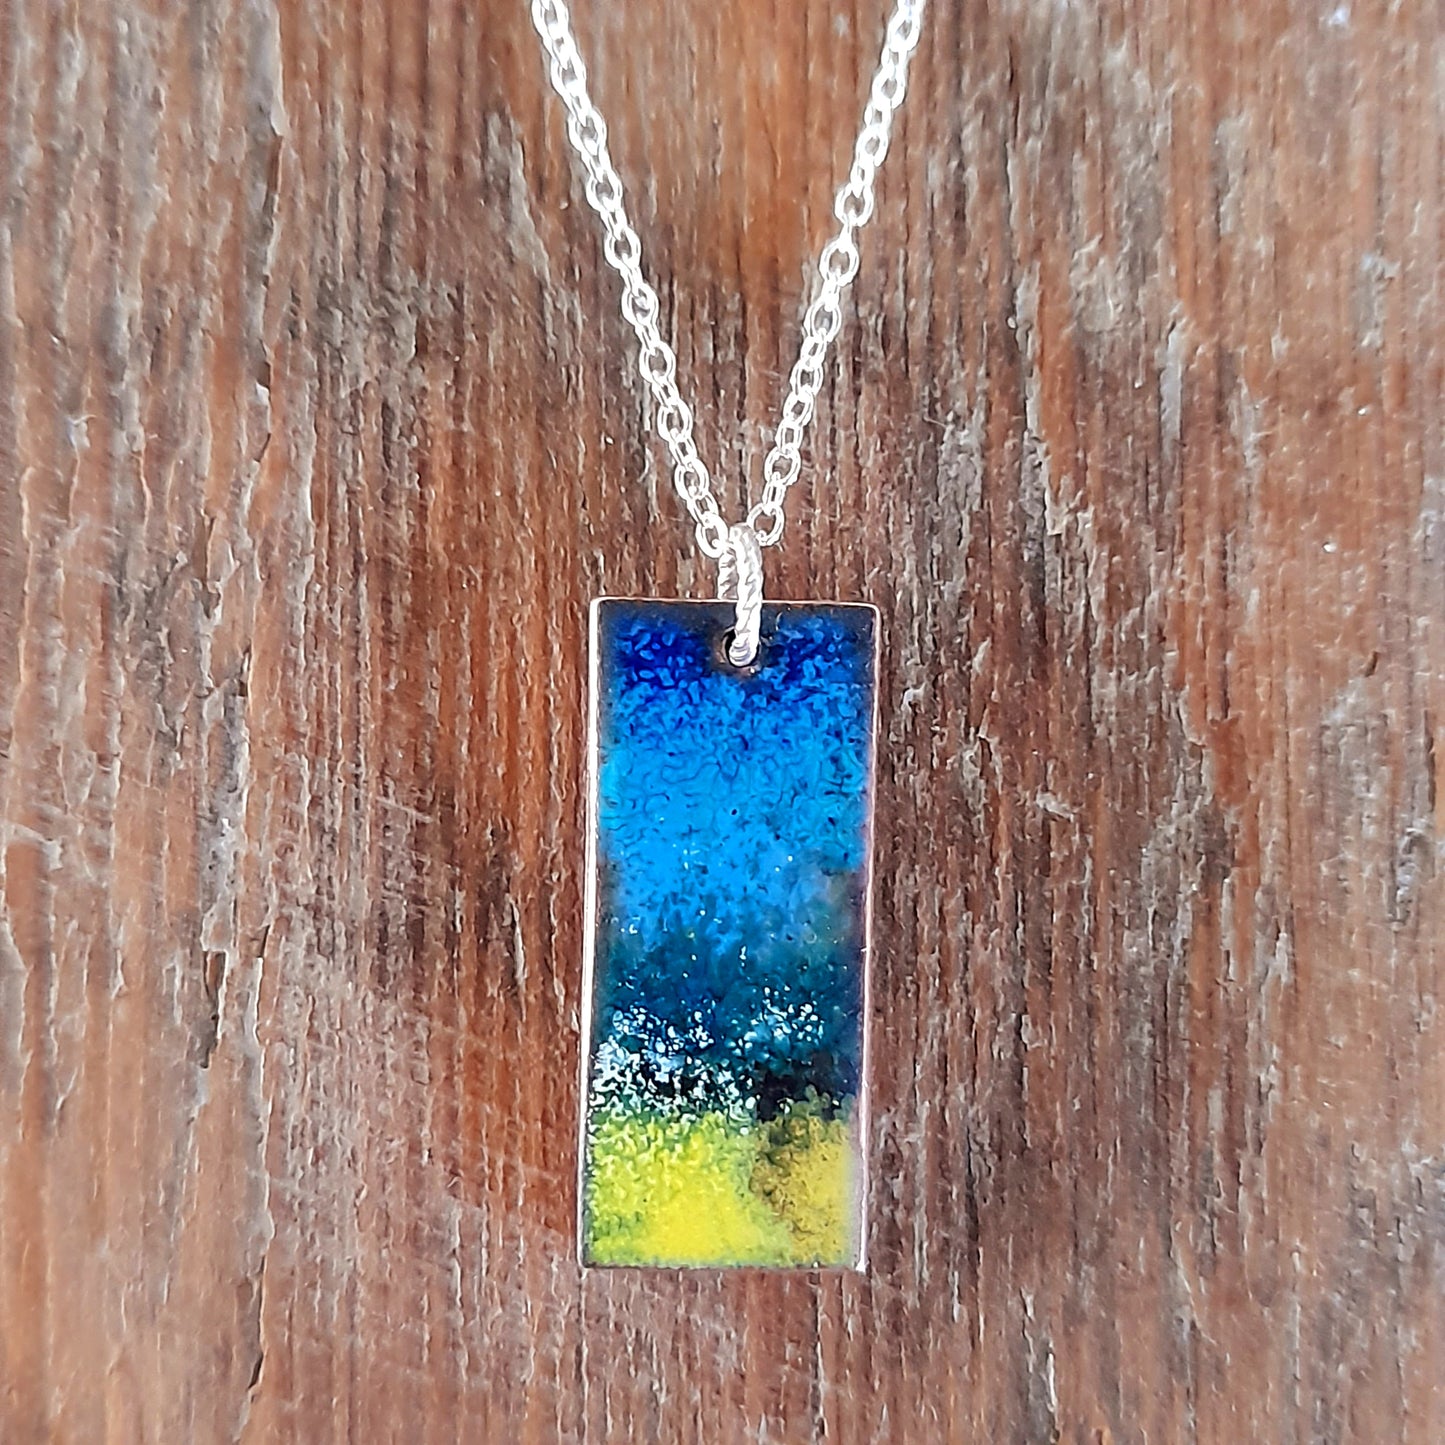 Handmade Yellow and Blue  Enamel Copper Necklace. Sand, Sky and Sea Themed Necklace.